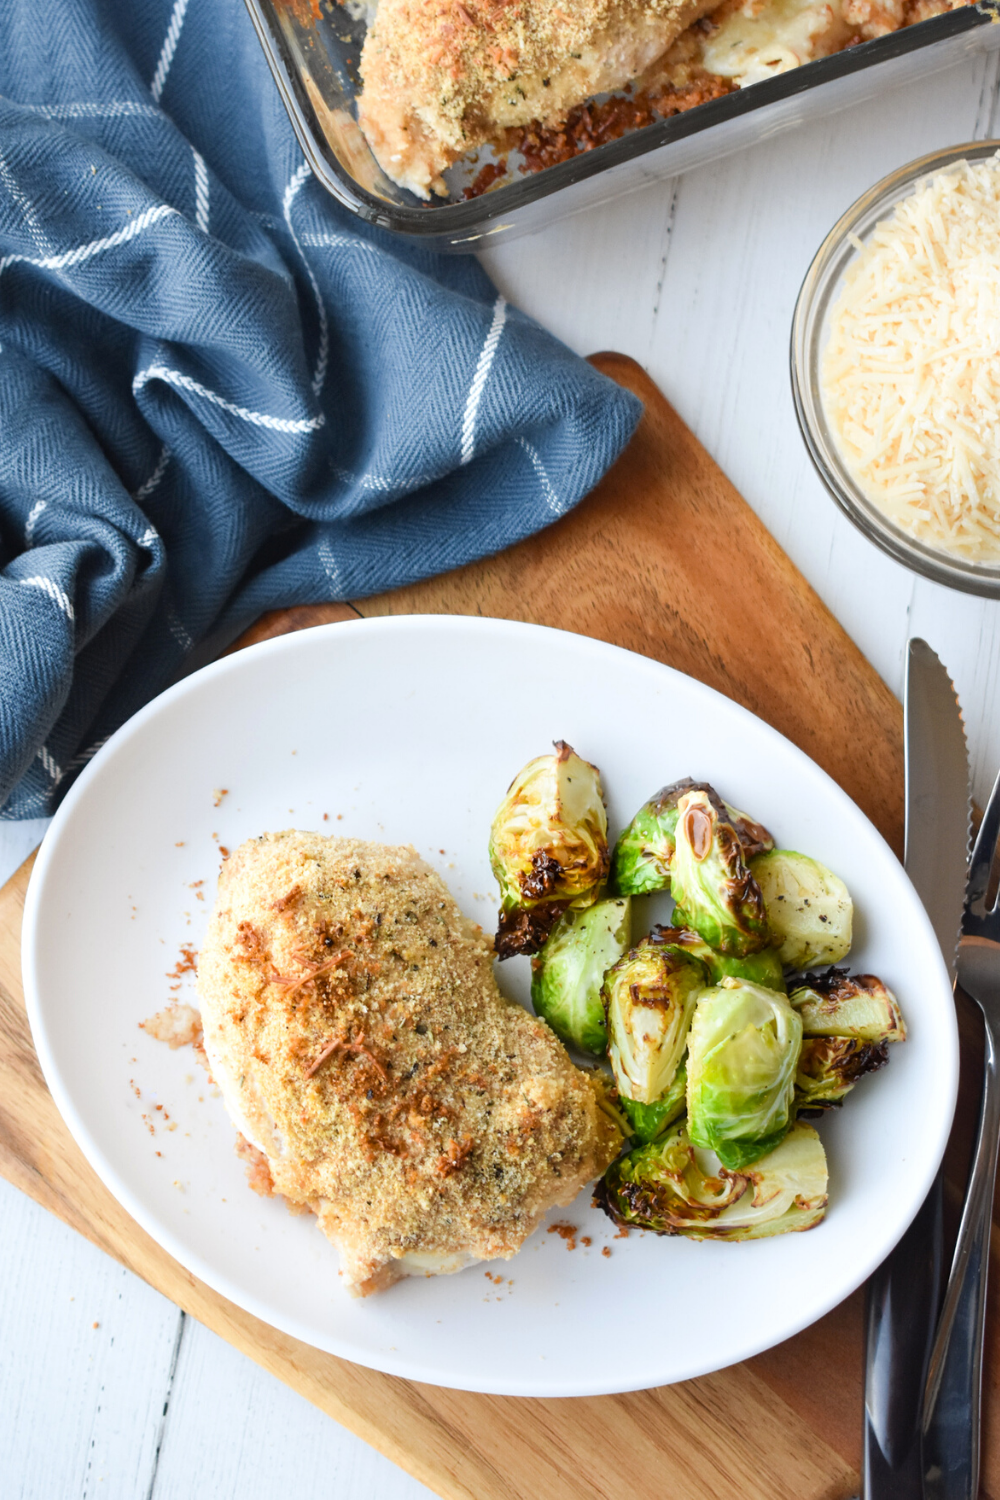 Cheese Stuffed Chicken Breasts, this ridiculously delicious dinner recipe is surprisingly easy to prepare! It's lower in carbs and takes only about 10 minutes to prepare. #chicken #recipe #cheese #stuffedchicken #dinner #familyfavorite #easy